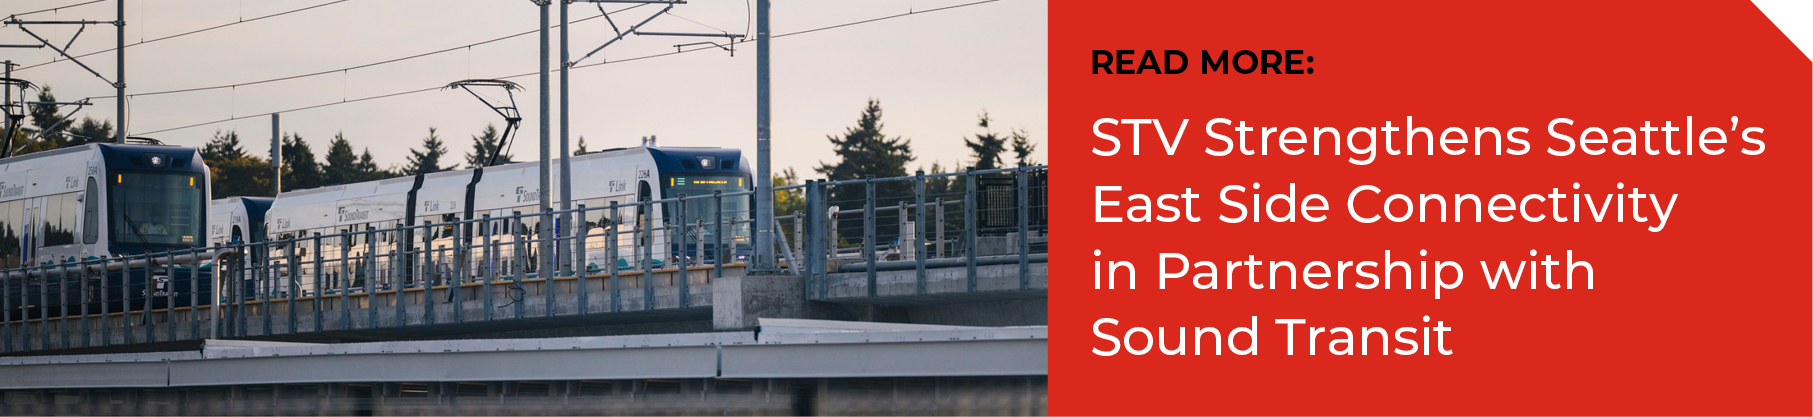 Read More: STV Strengthens Seattle’s East Side Connectivity in Partnership with Sound Transit